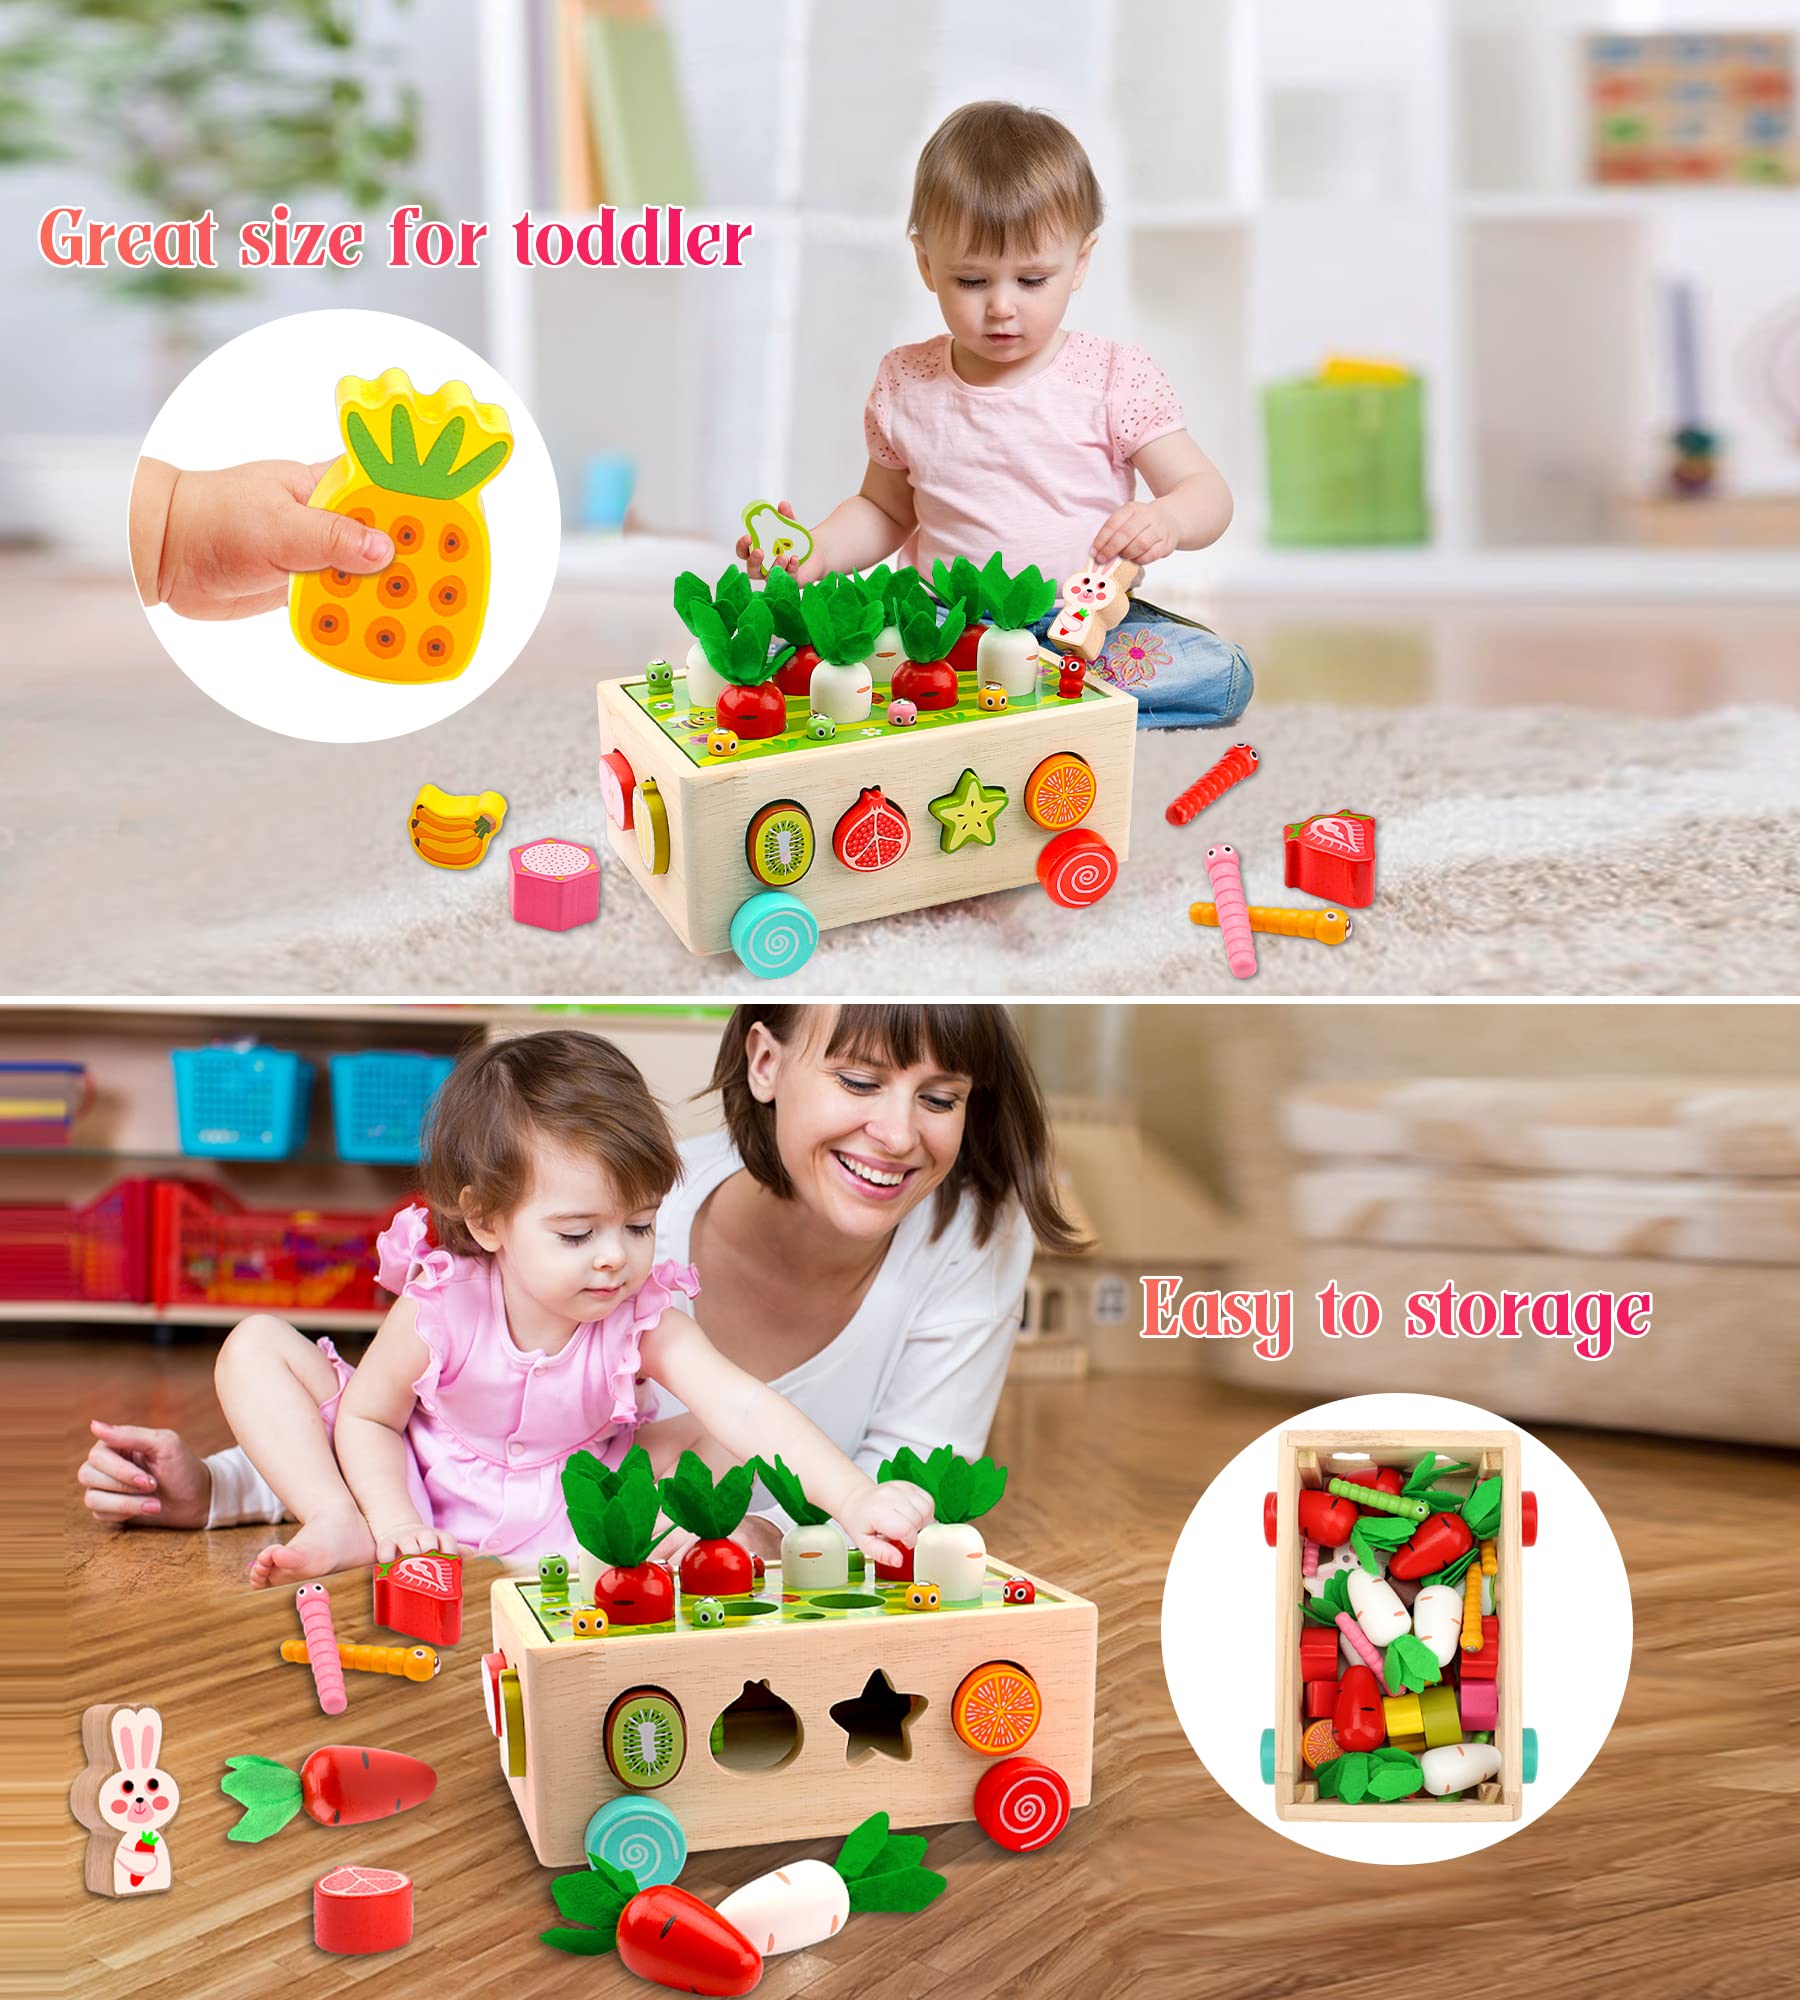 Montessori Wooden Toddler Girl Toys: Montessori Toys for 1 2 Year Old Girl Boy | Educational Learning Toy for Age 1-3 Shape Sorter Baby Toys 18+ Months Preschool Sensory Puzzle Block Gift for Kid